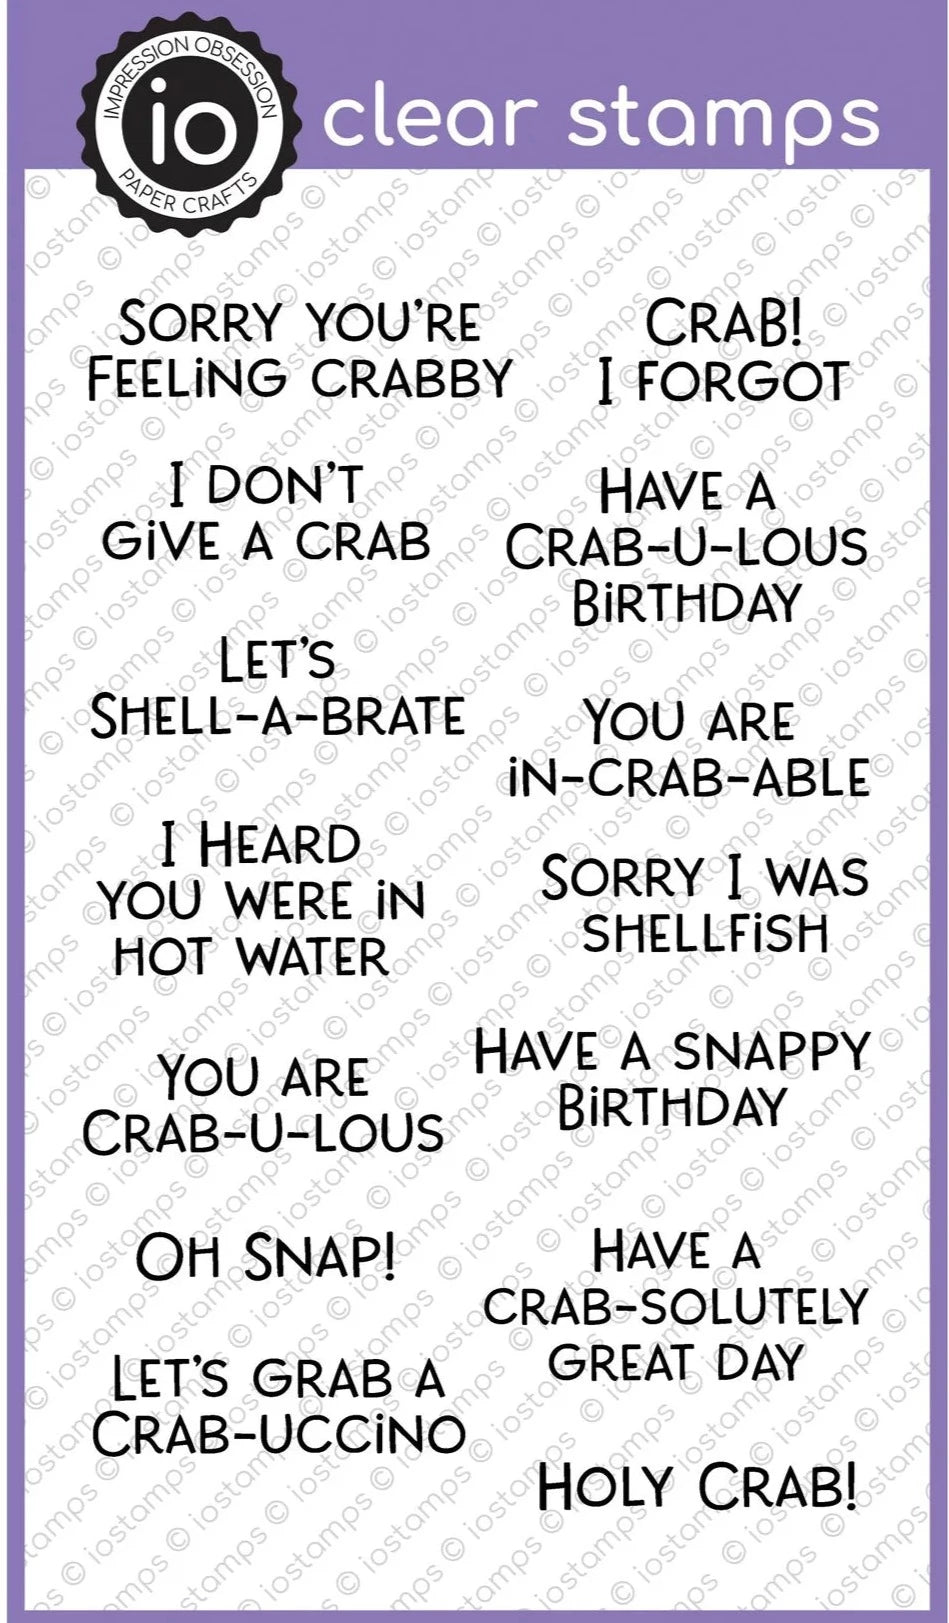 Pin by v on just cool stuff  Synonyms for crazy, Adjectives, In